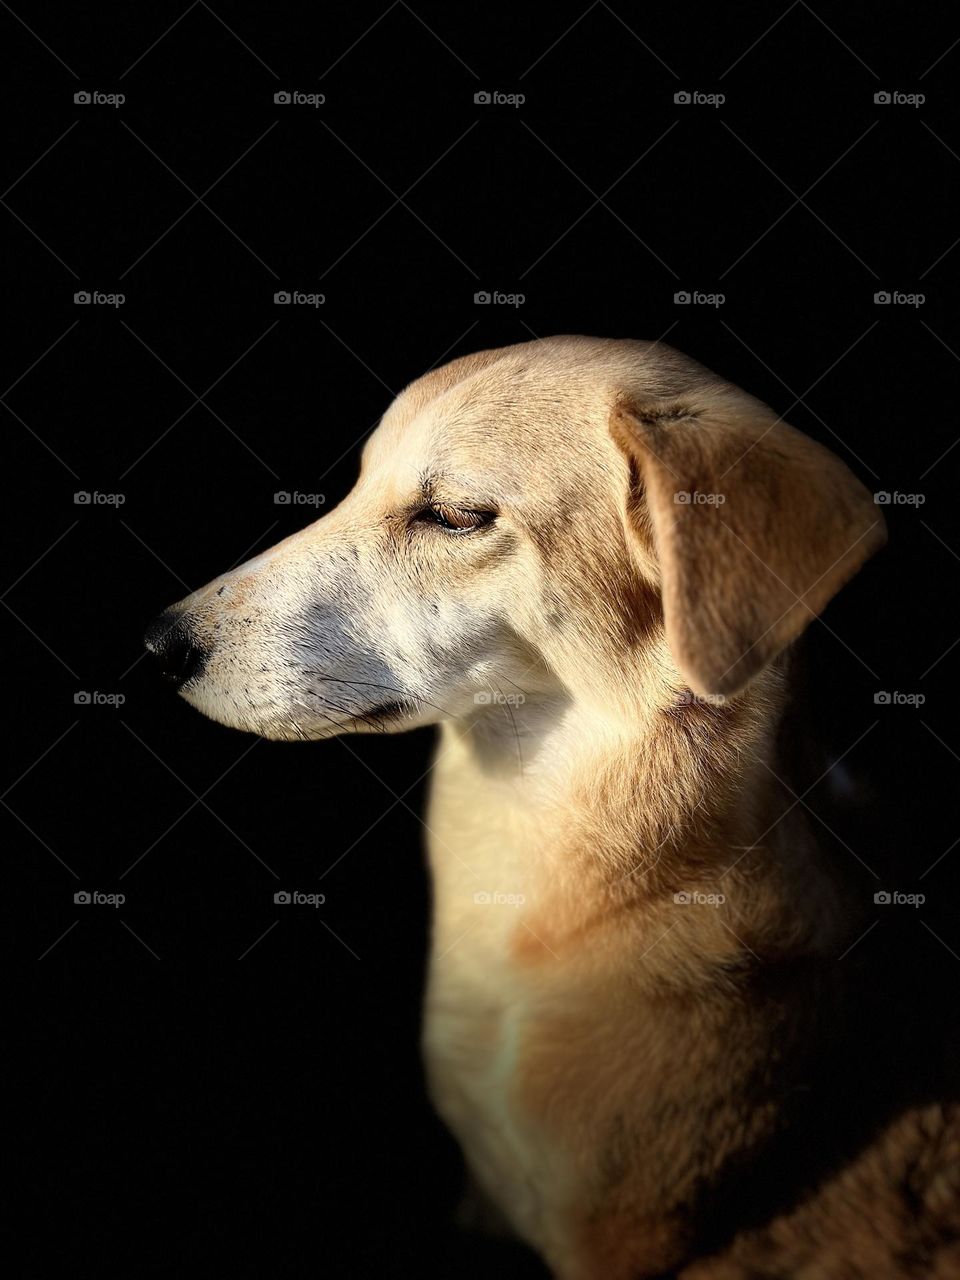 Closeup portrait in profile of a mixed breed dog in repose. Dark background emphasized the white and tan fur.